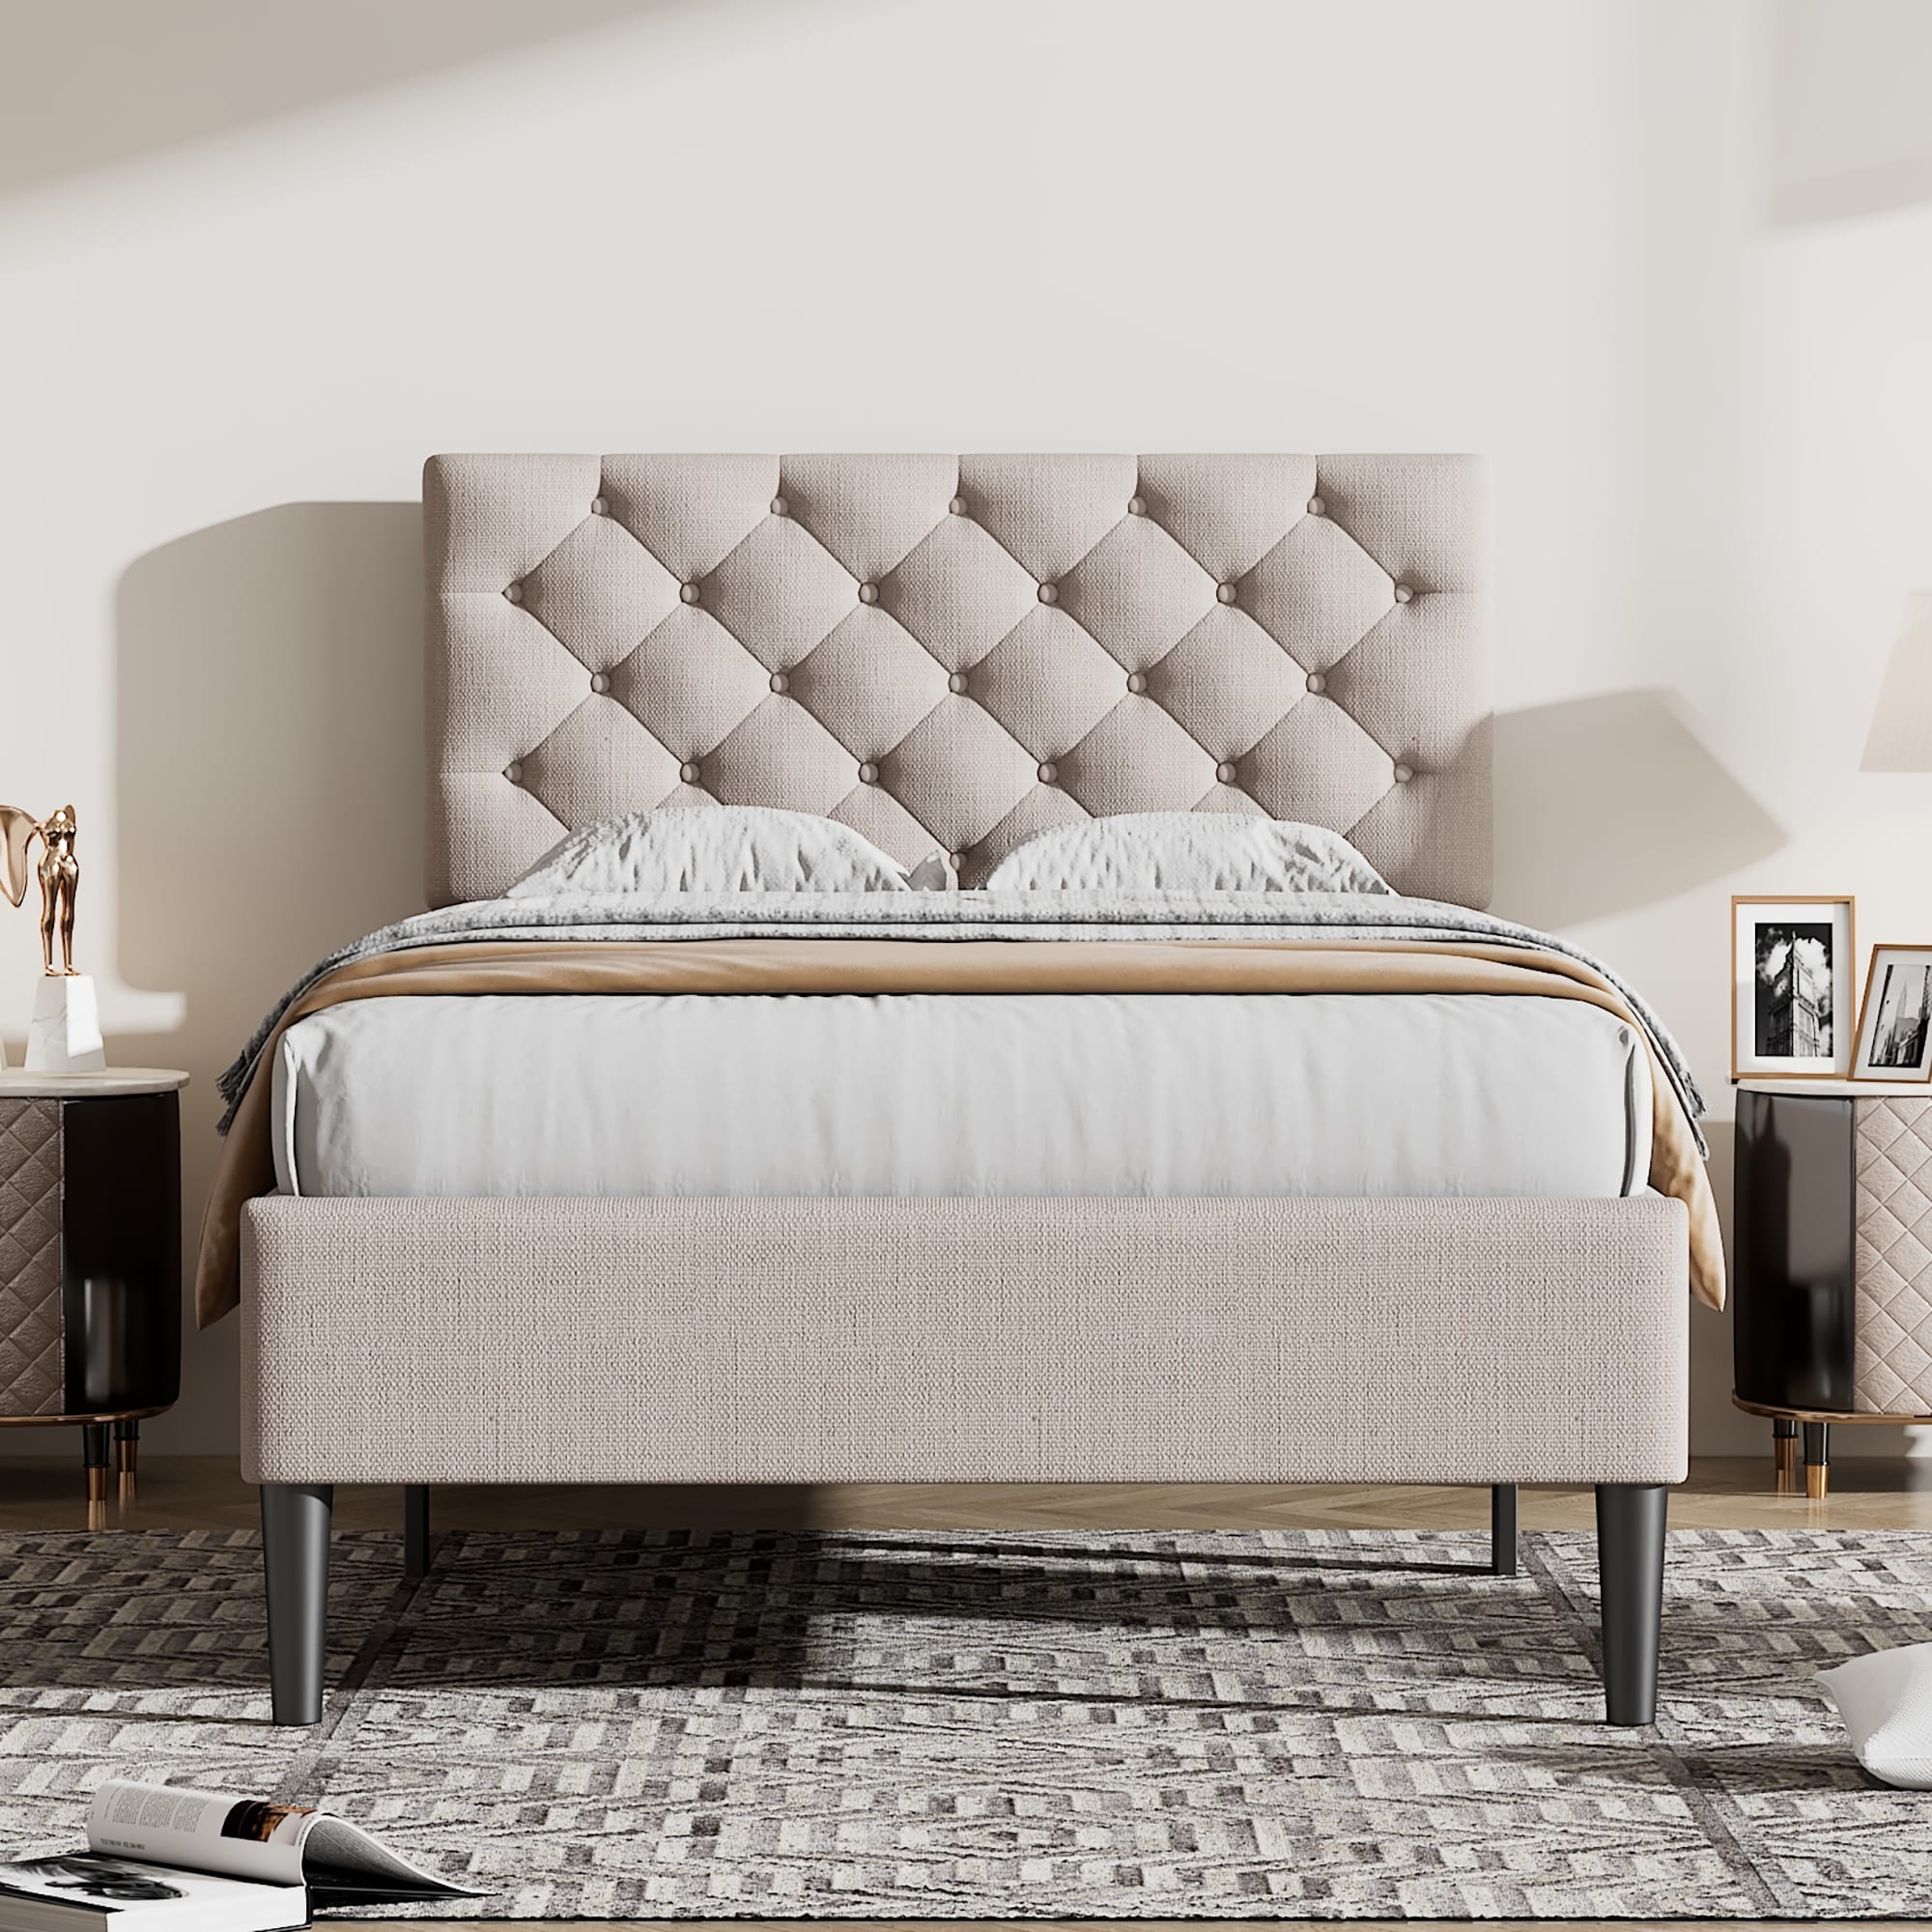 Stylish Upholstered Leather Bed With Foam-Filled Soft Headboard